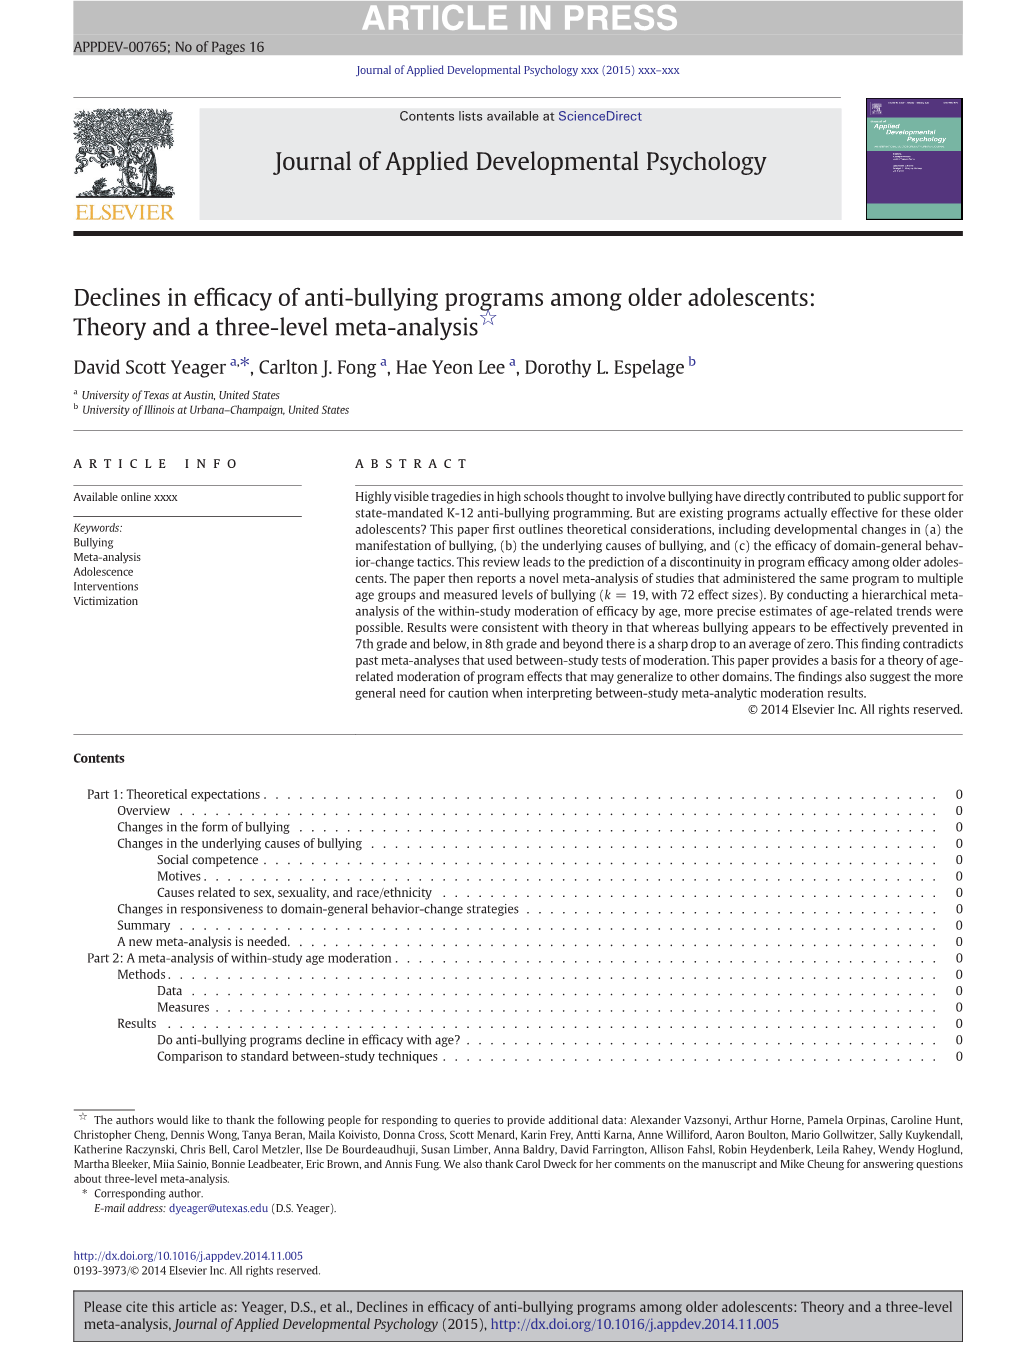 Declines in Efficacy of Anti-Bullying Programs Among Older Adolescents